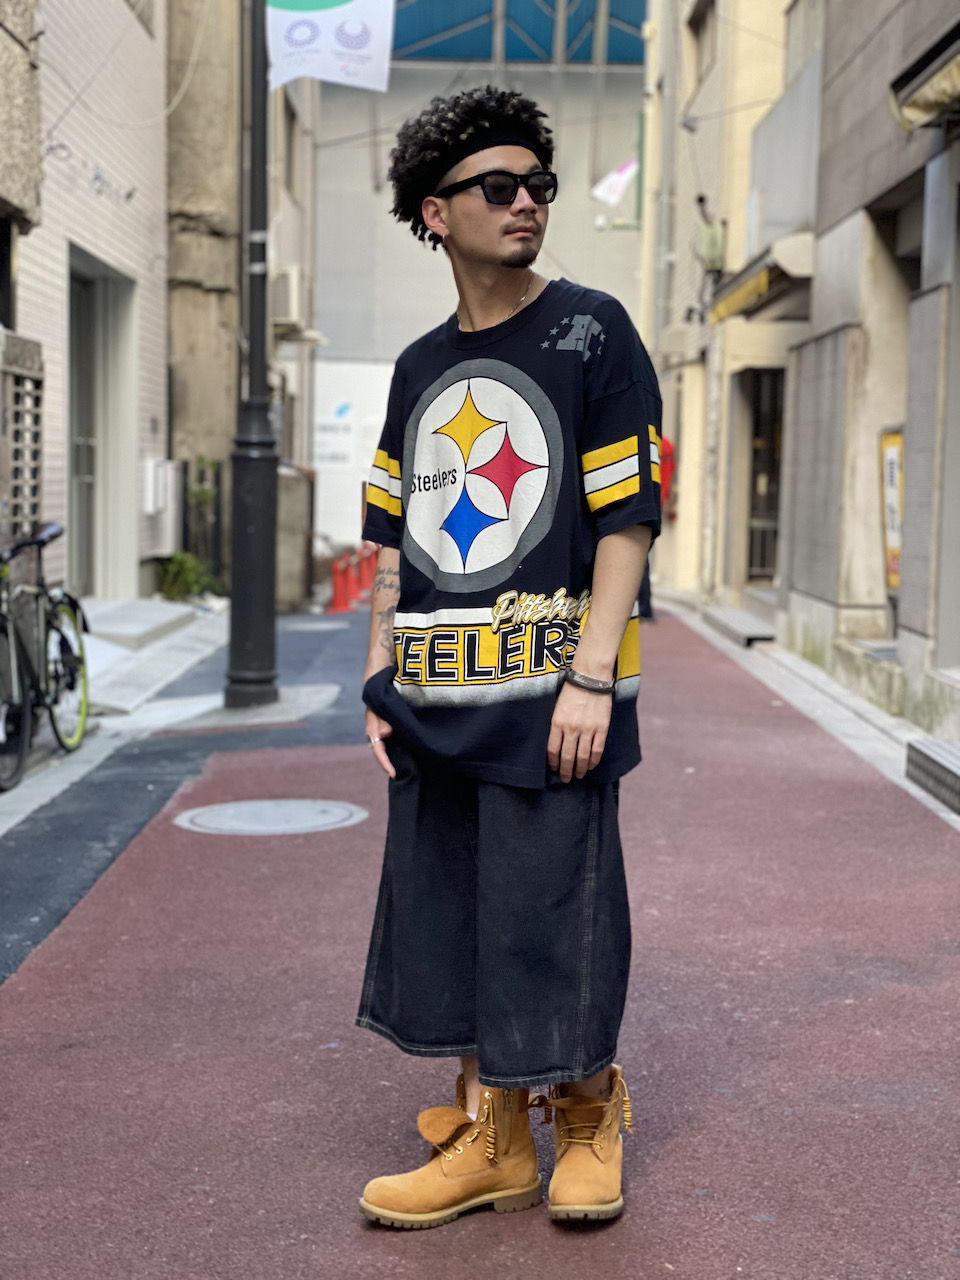 Steelers style